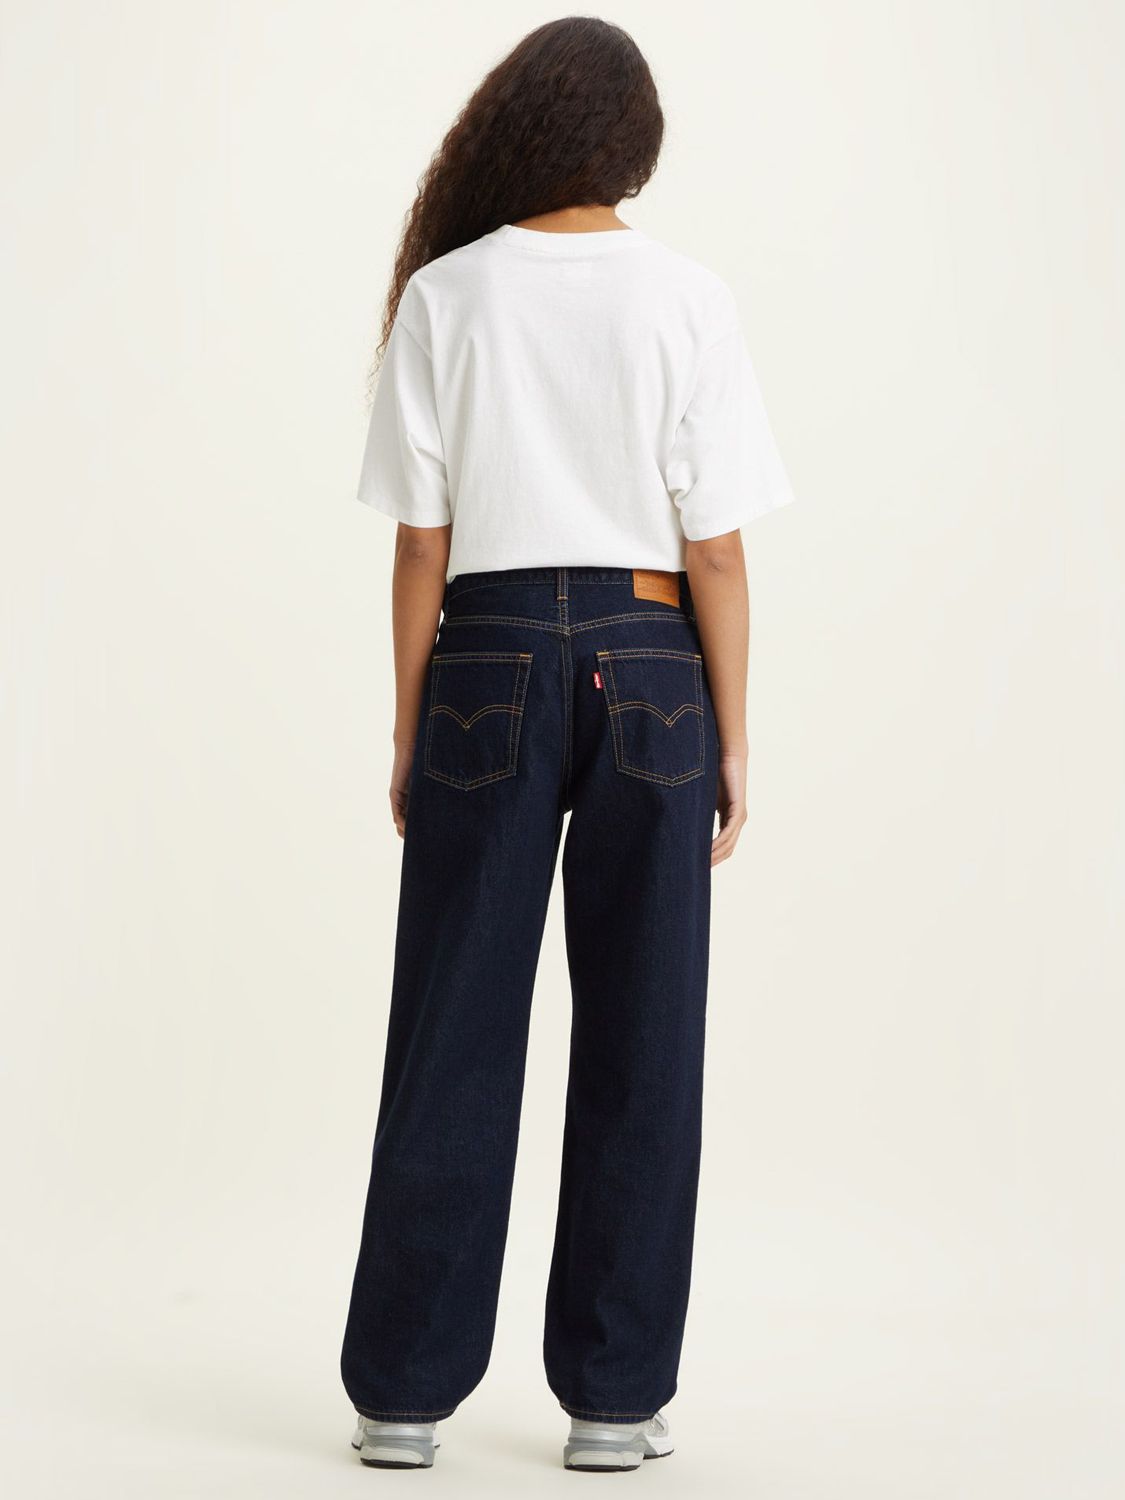 Levi's WellThread Baggy Dad Jeans, Indigo Worn In at John Lewis & Partners